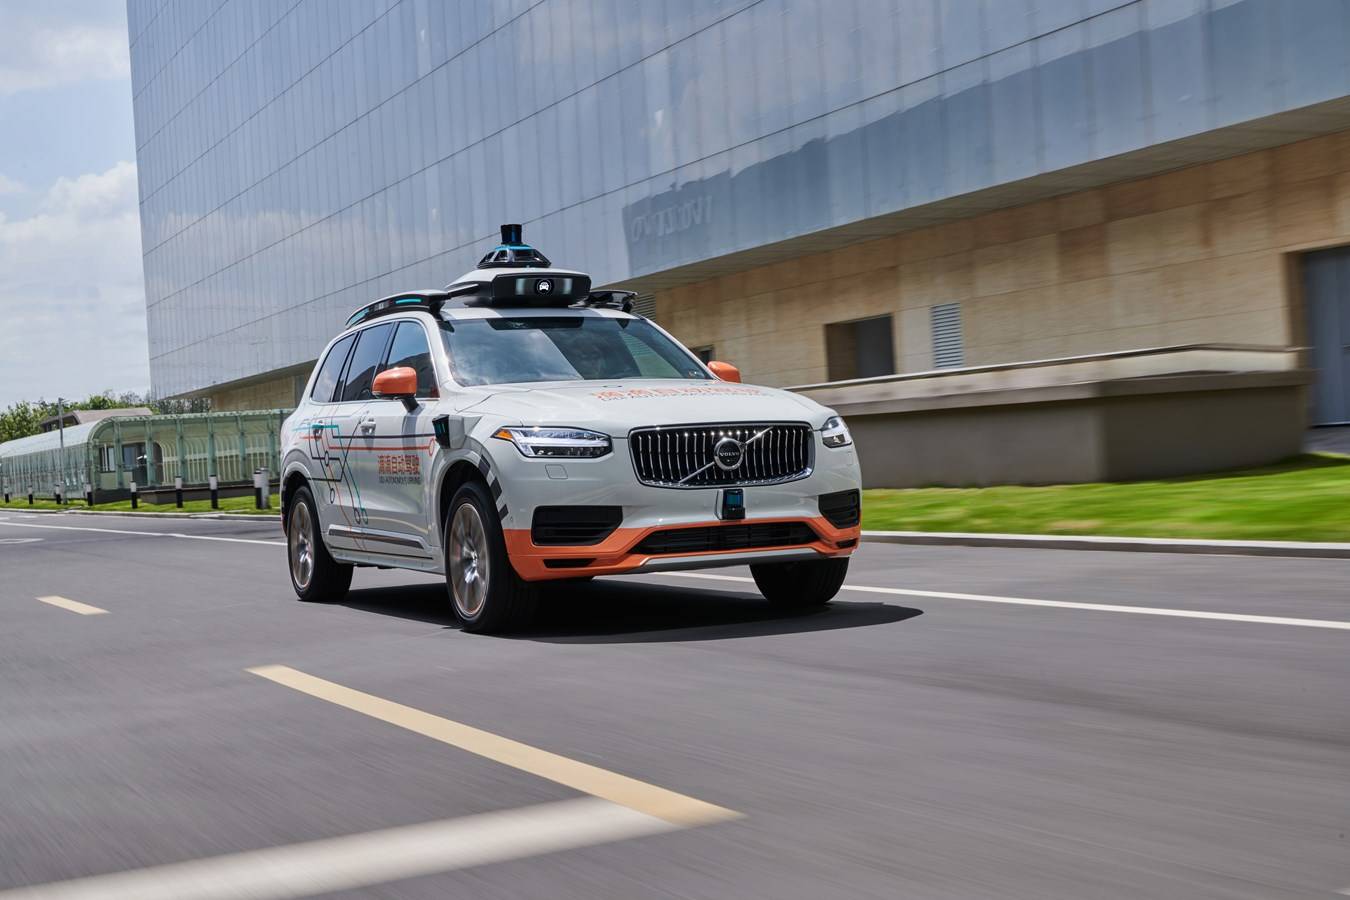 Volvo Cars will initially provide Didi with hundreds of vehicles, with the aim of adding more as the self-driving test fleet expands. 